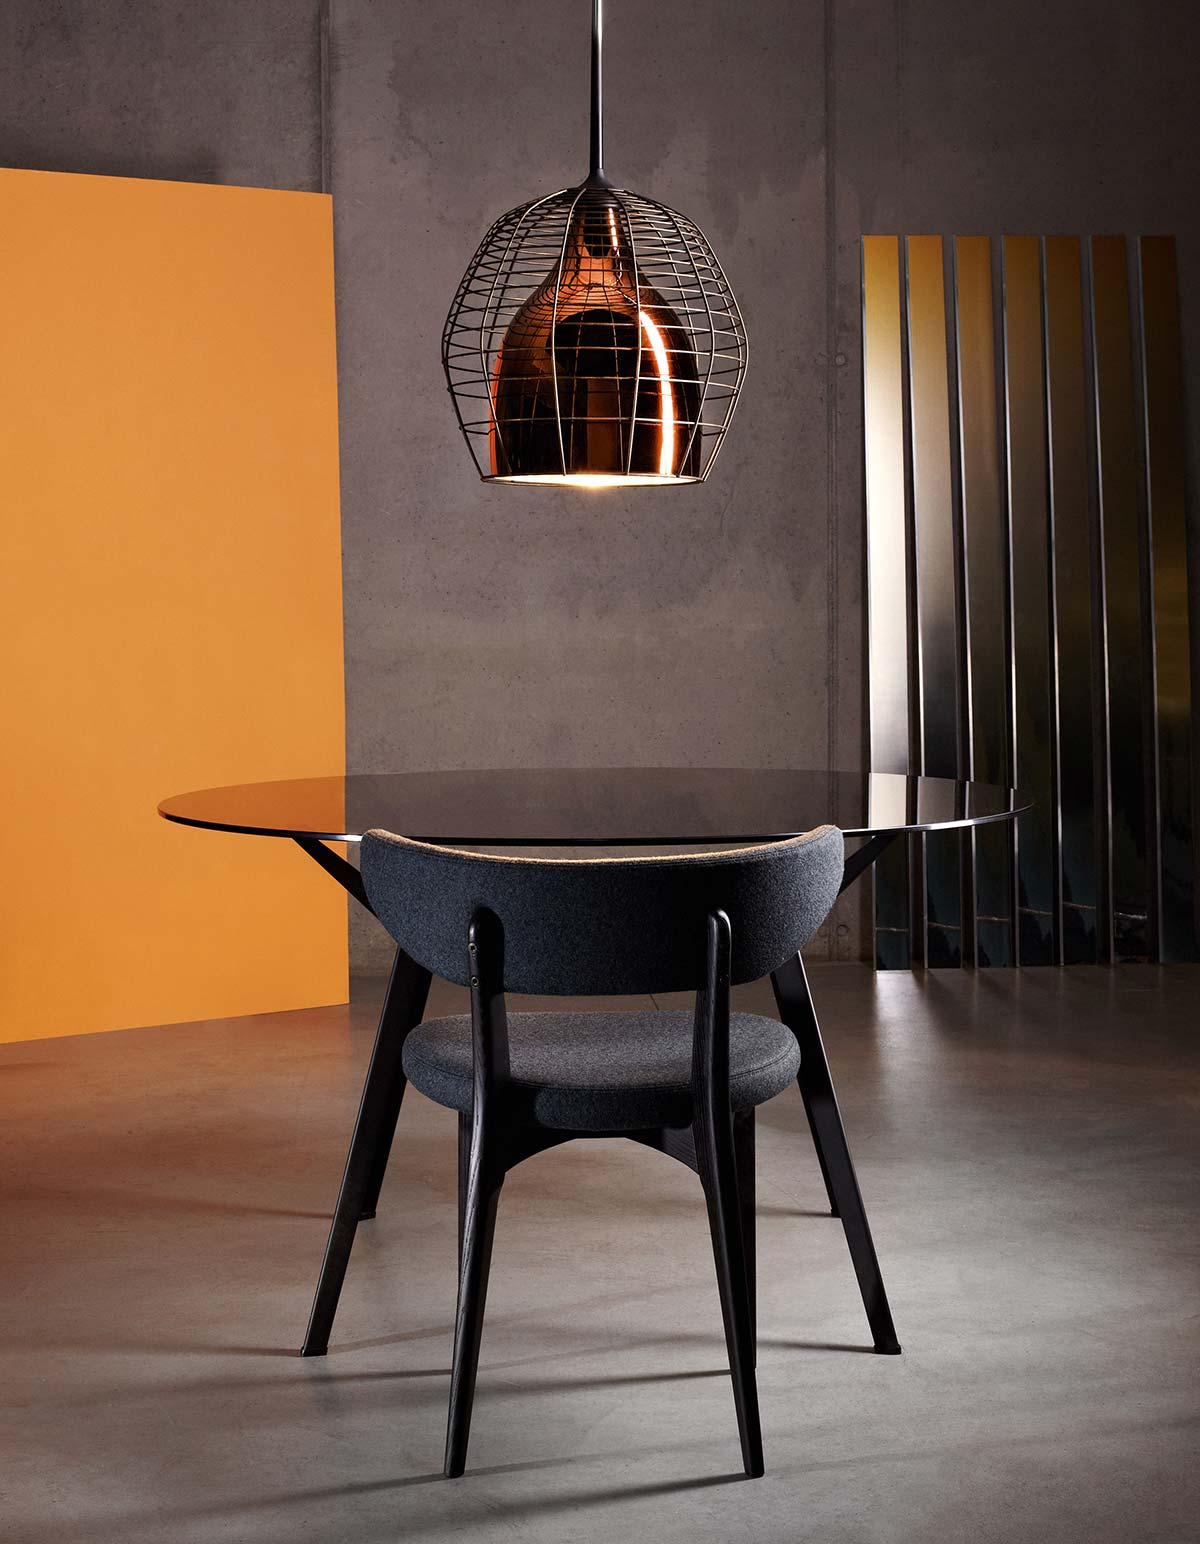 Cage, Diesel with Foscarini